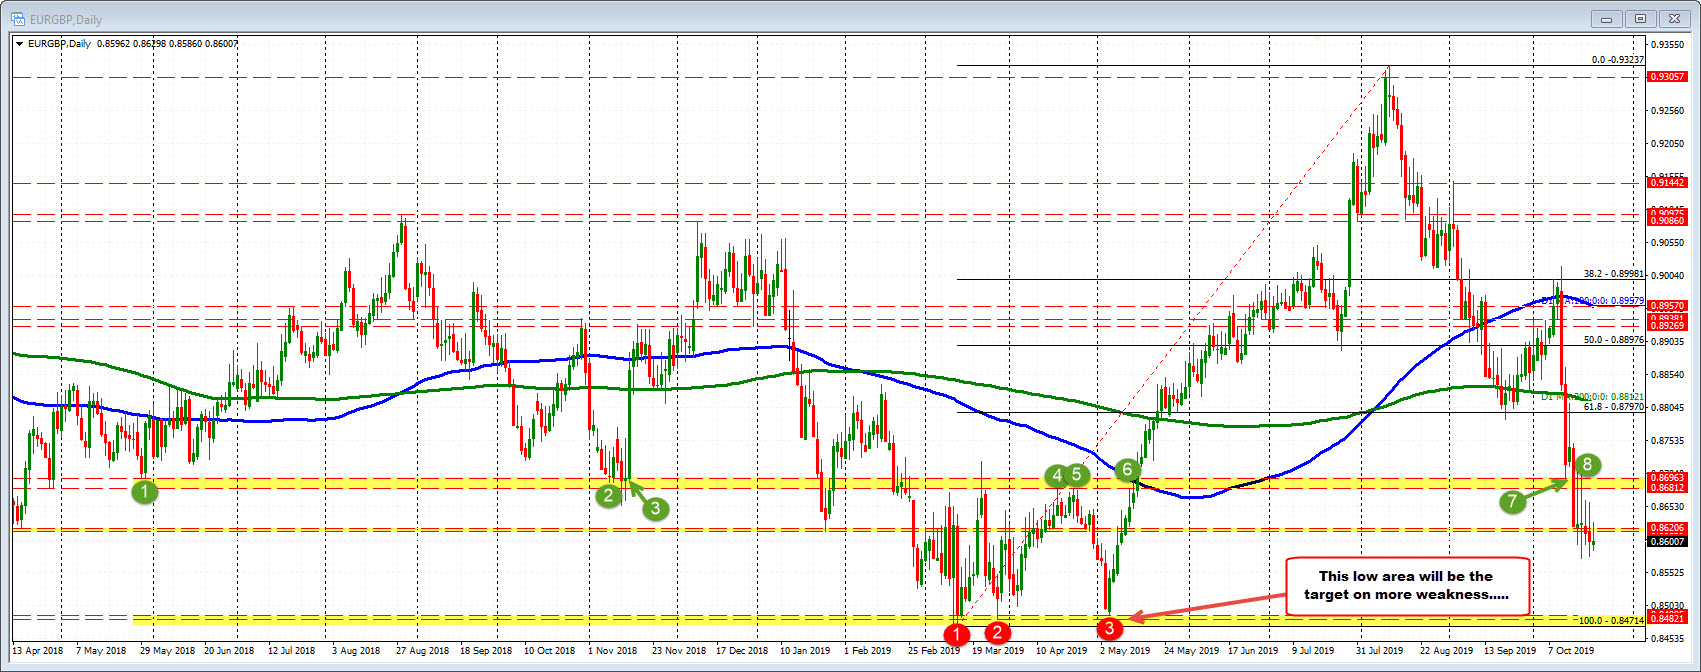 The daily chart of the EURGBP